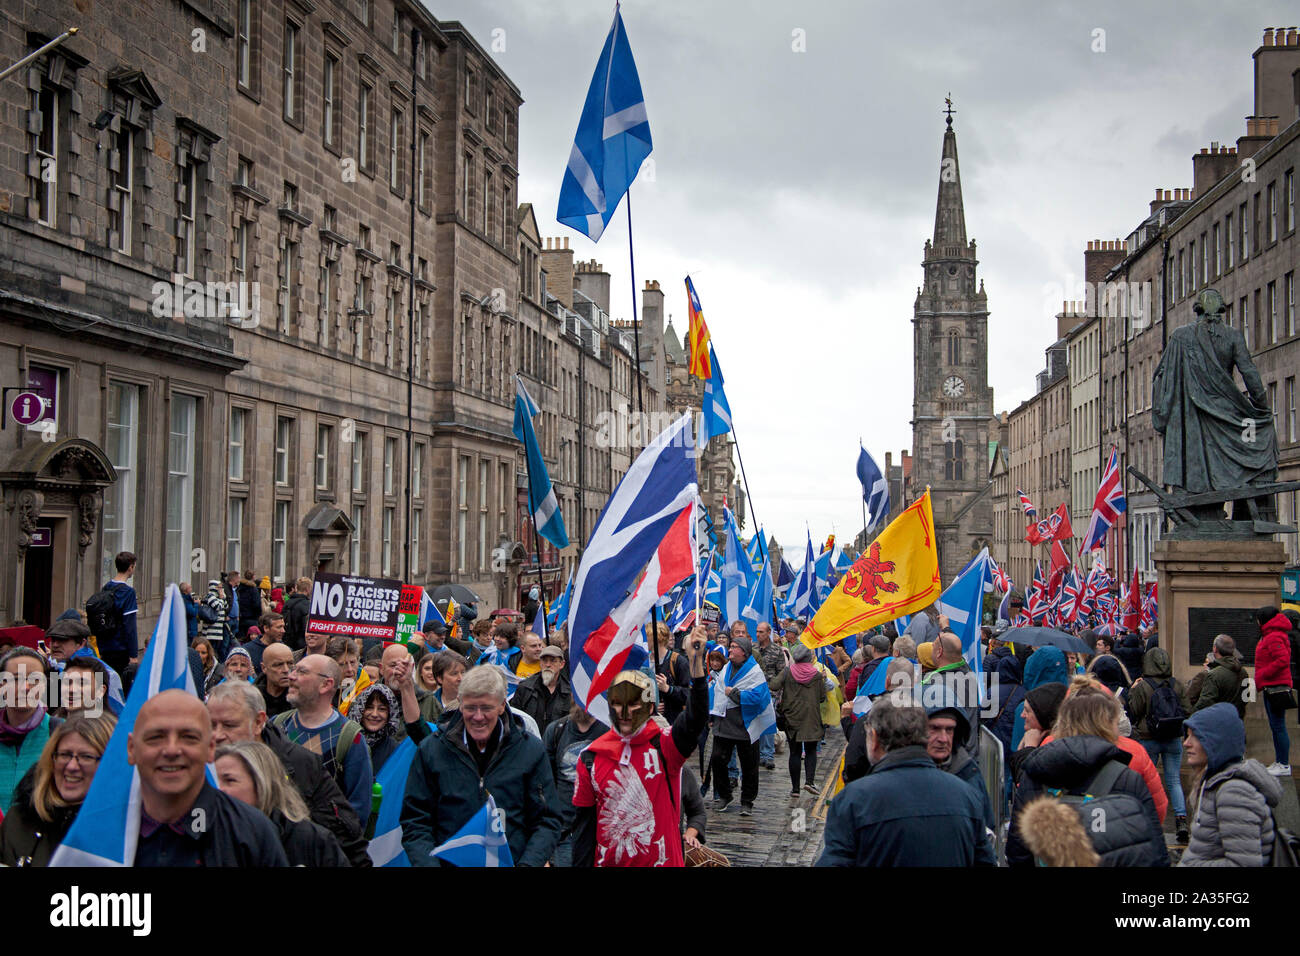 Edinburgh, Scotland, UK. 5th October 2019. Thousands of people of all ages marched on the streets ofEdinburgh in a pro-Scottish independence march through the streets of Edinburgh. Organisations and groups who support separation from the United Kingdom joined the All Under One Banner (AUOB) procession on Saturday. AUOB estimate that at least 100,000 people might join the rally. Stock Photo